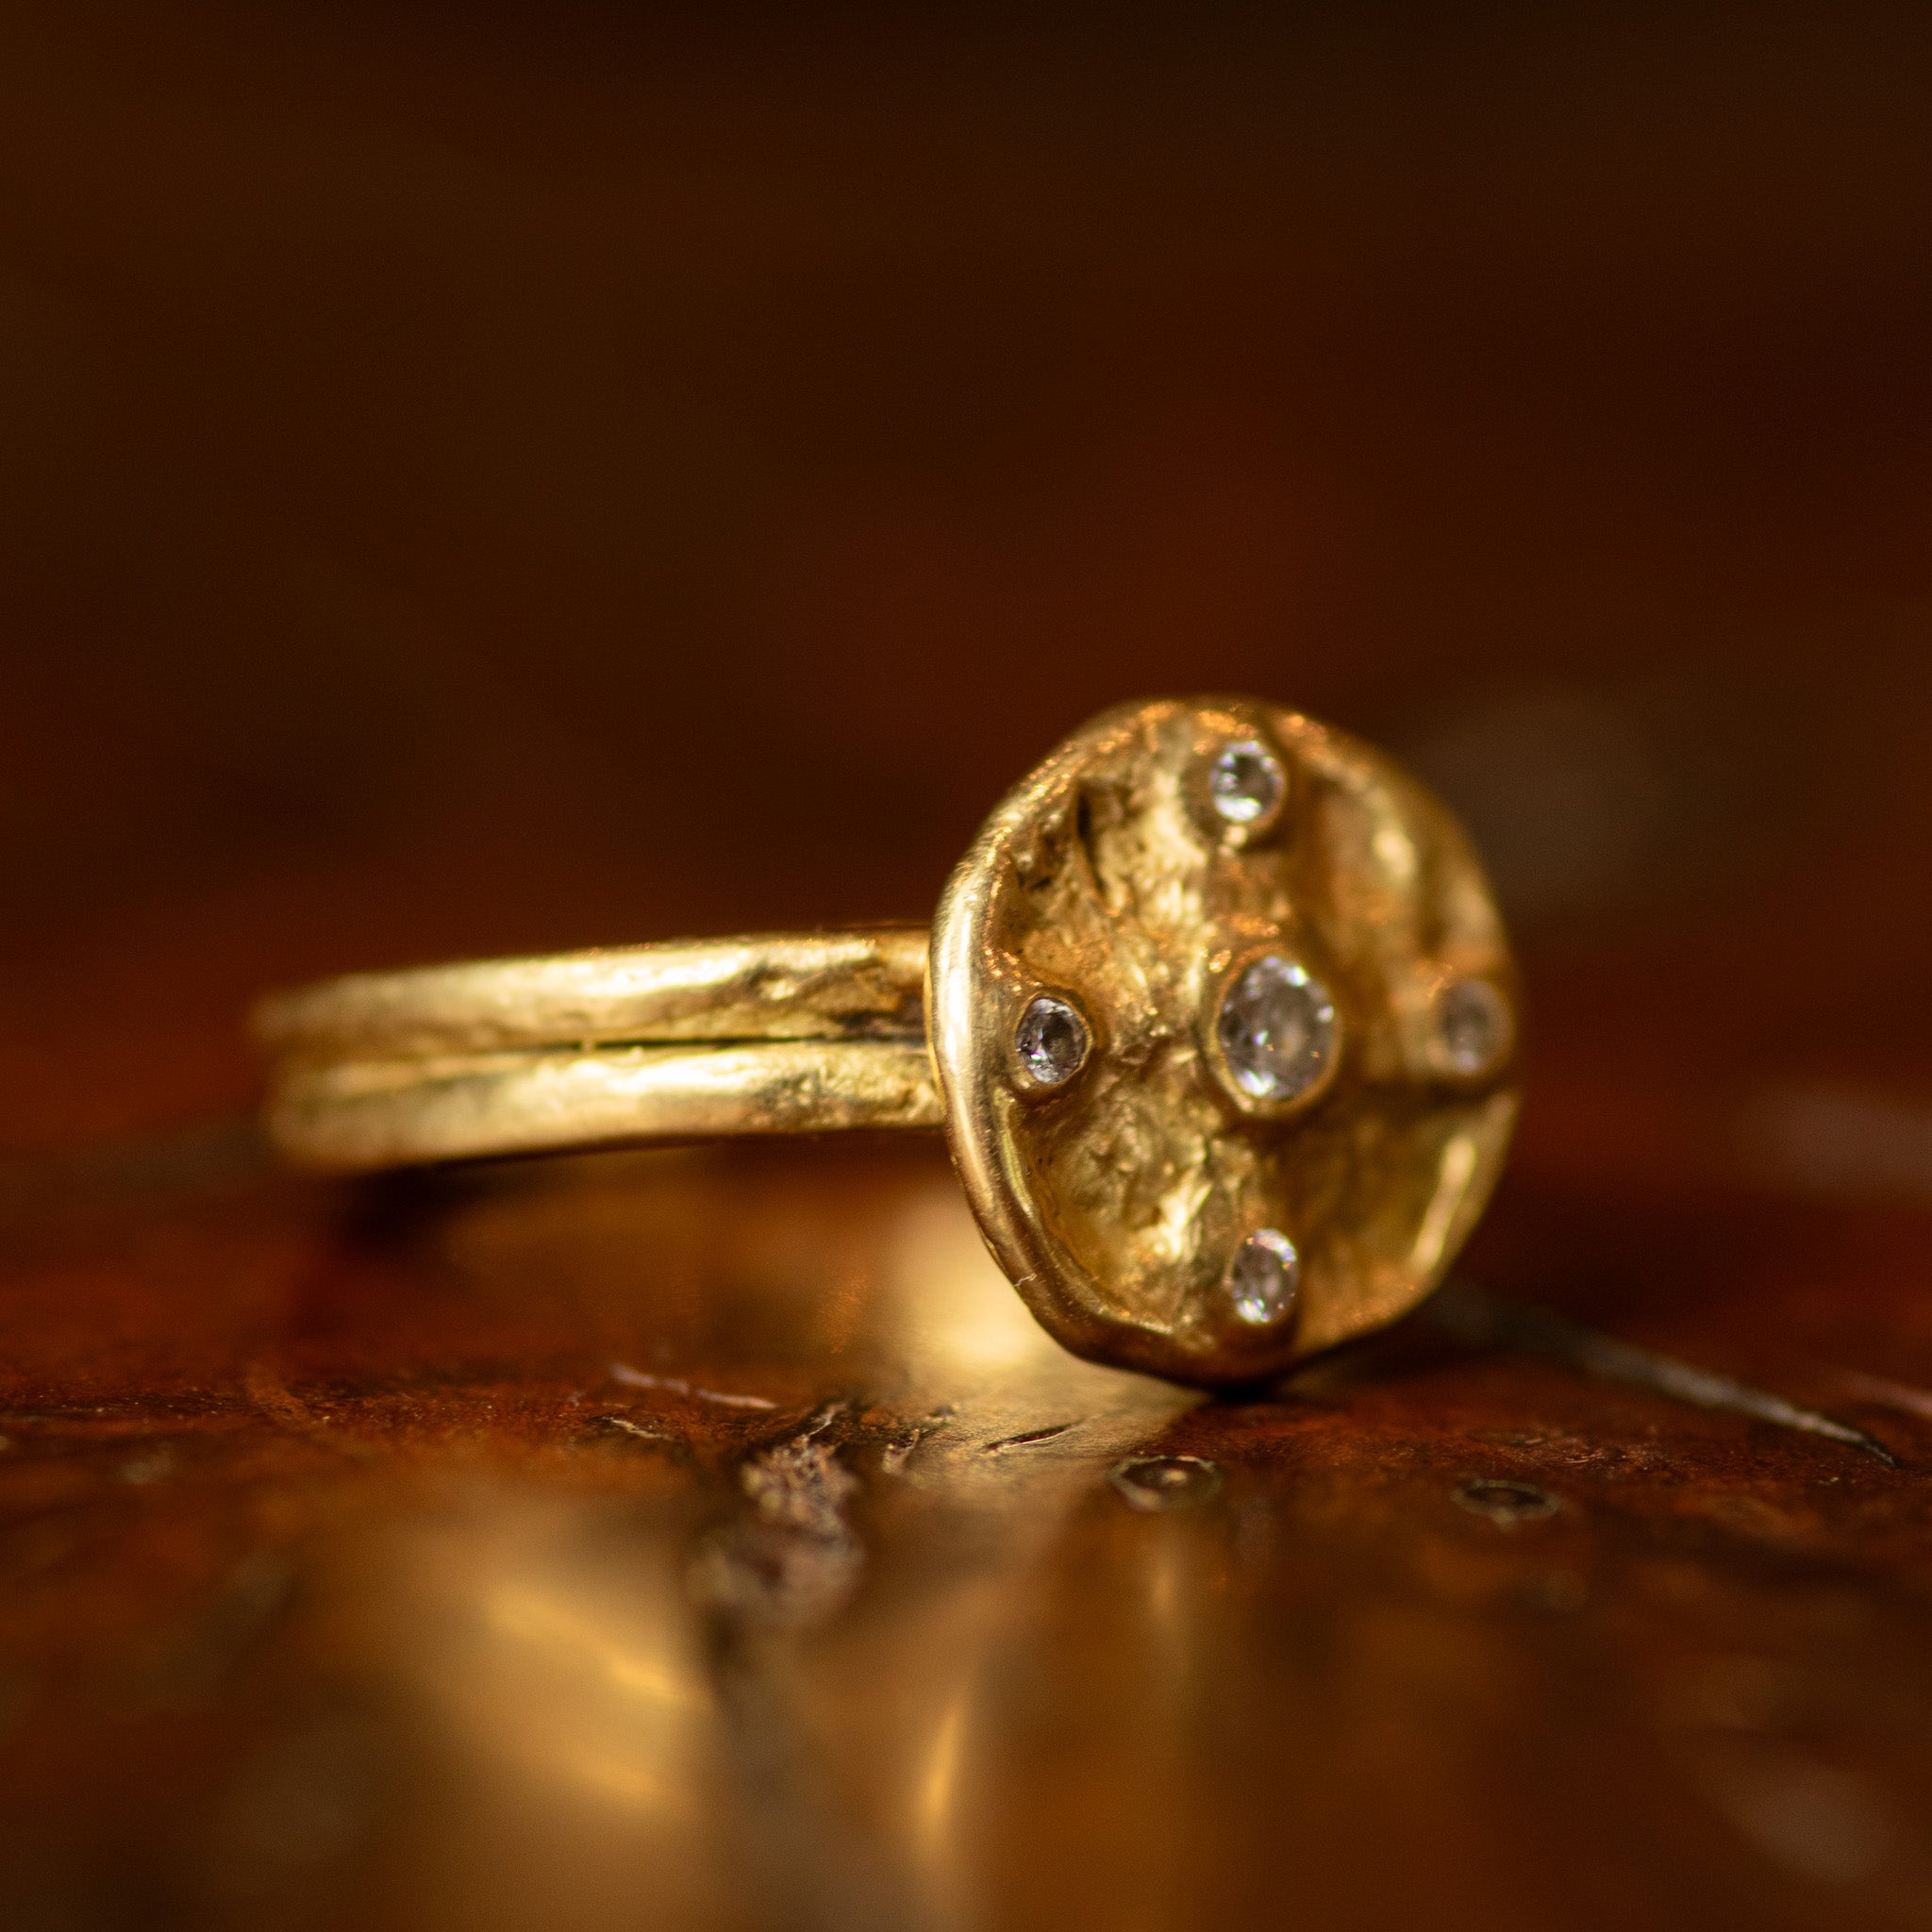 Equilateral Cross Ring